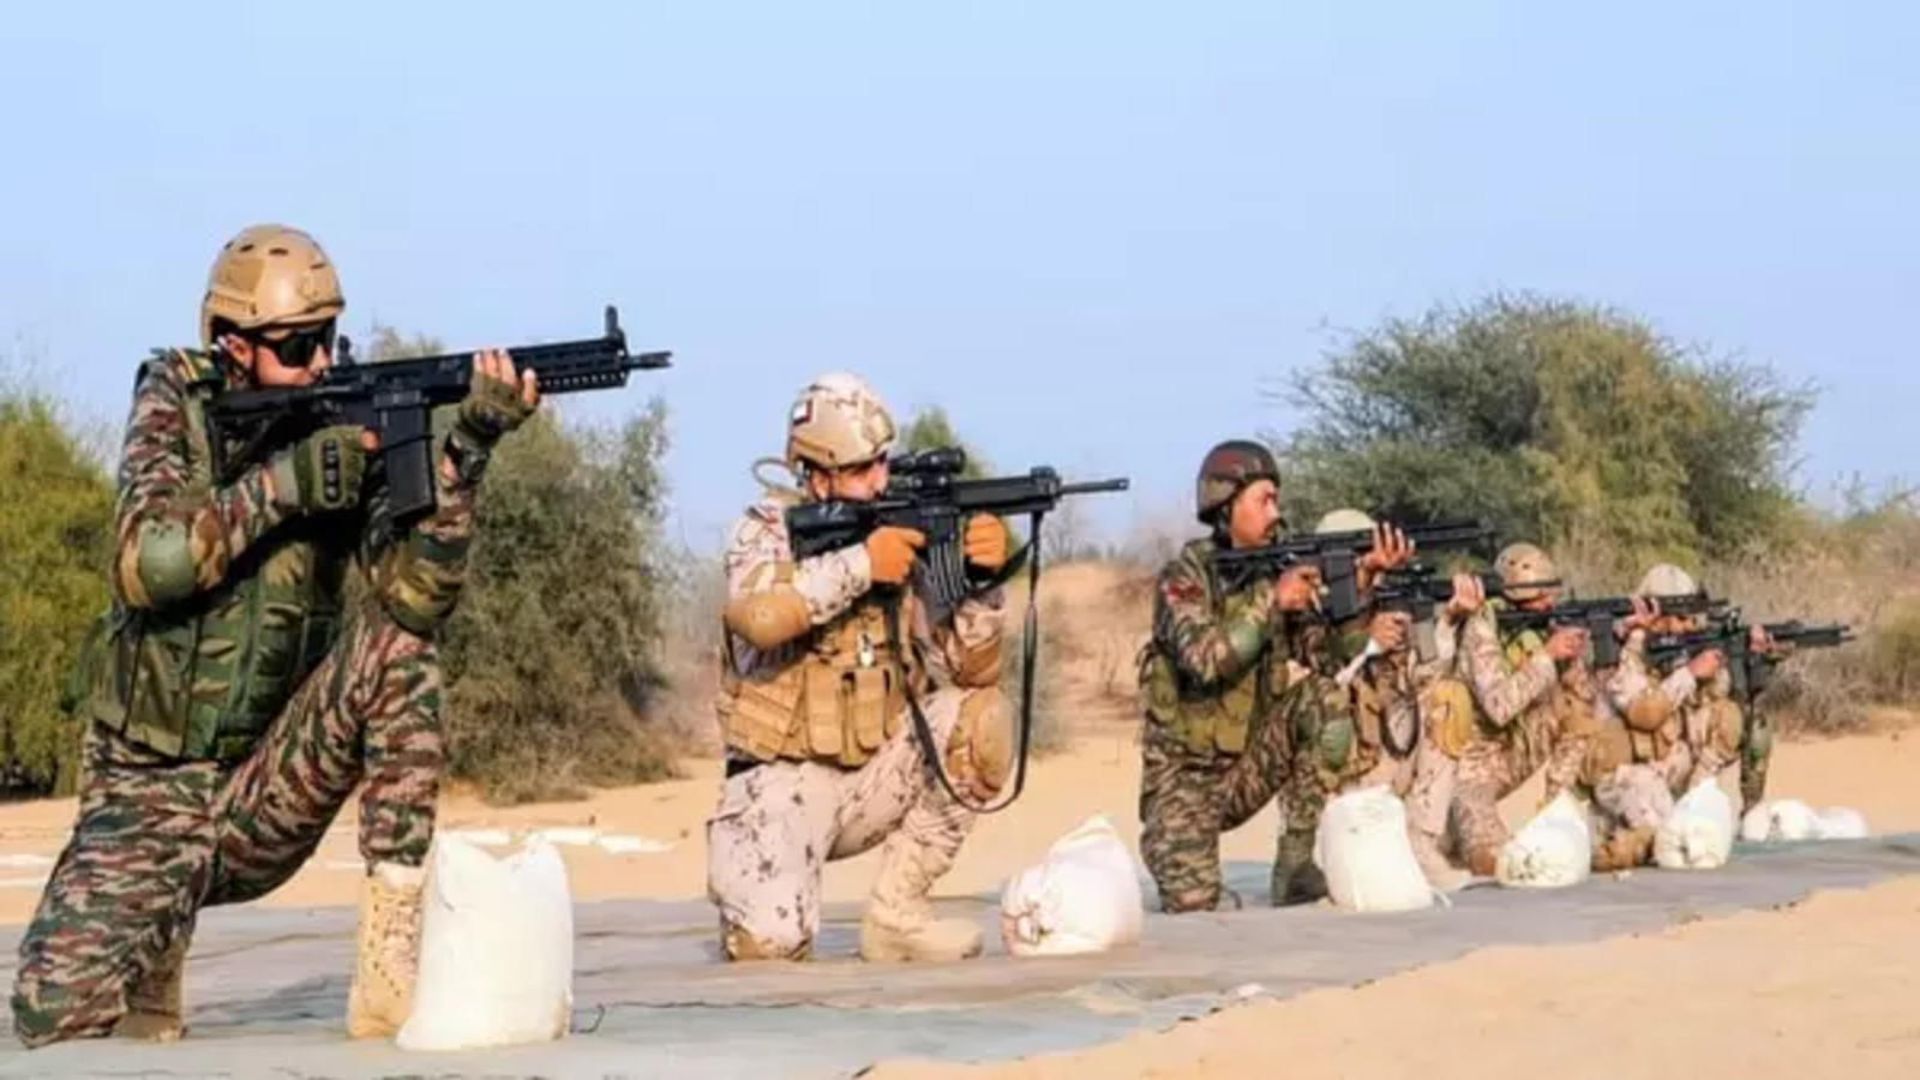 India-UAE joint military exercise ‘Desert Cyclone’ is in progress in Rajasthan